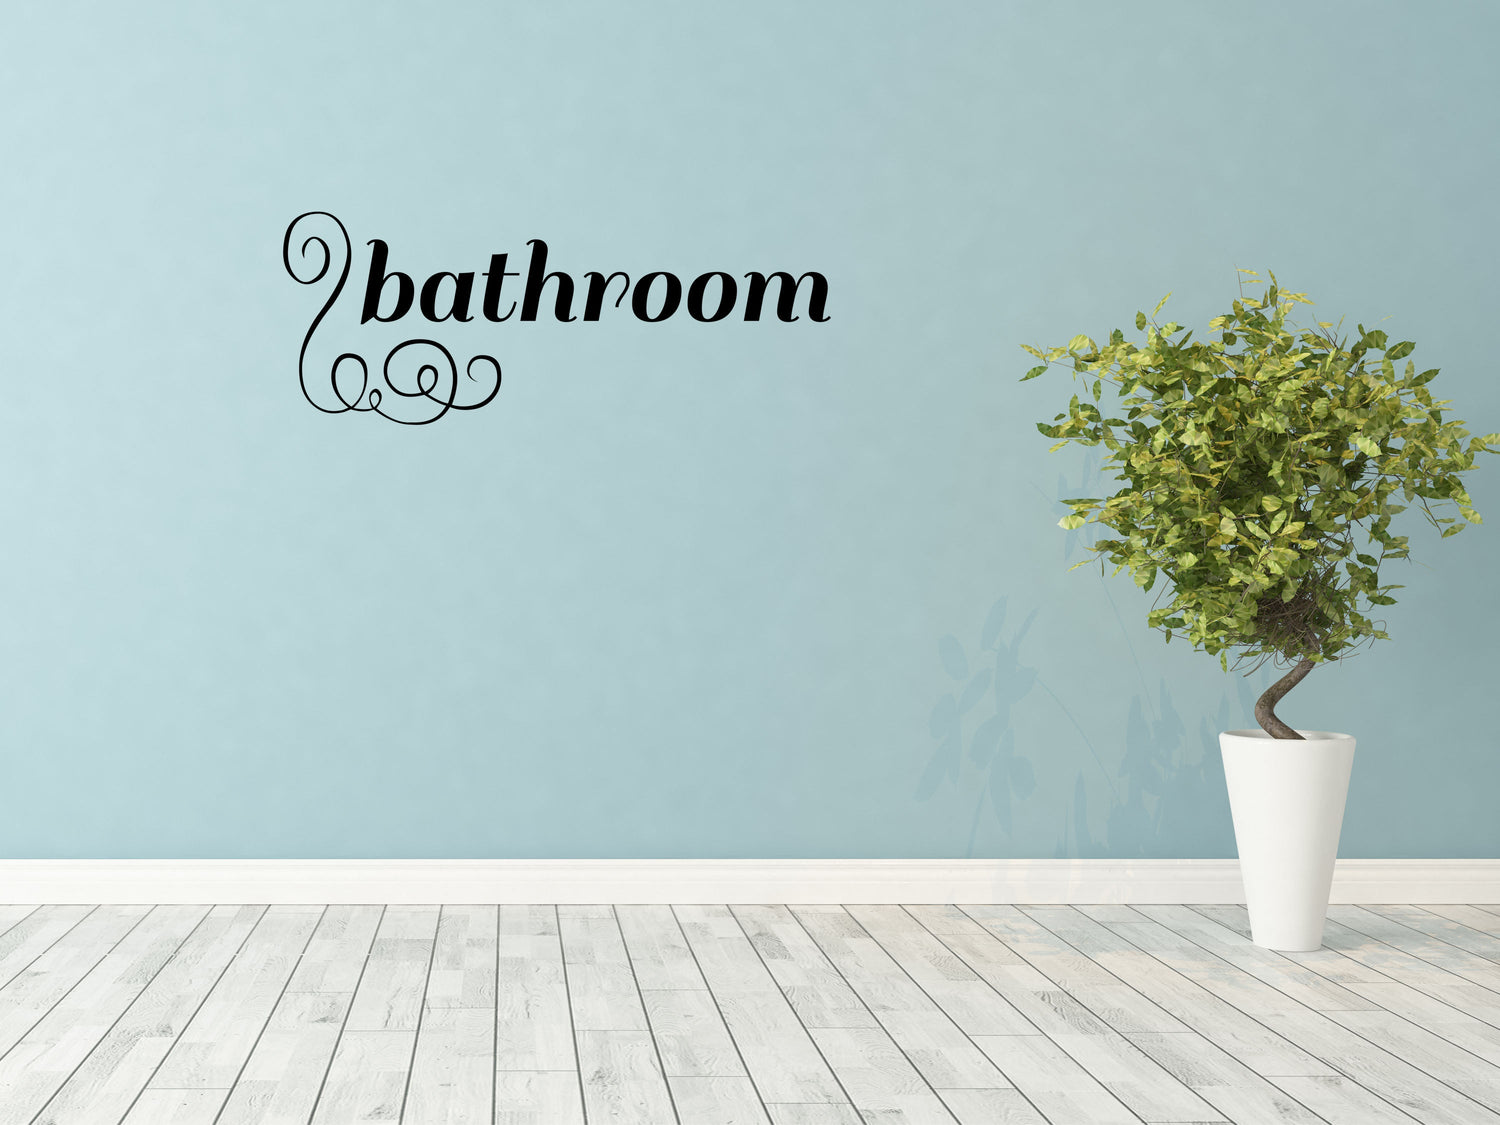 Bathroom Wall Decals: Stylish & Creative Removable Designs | Shop Now!